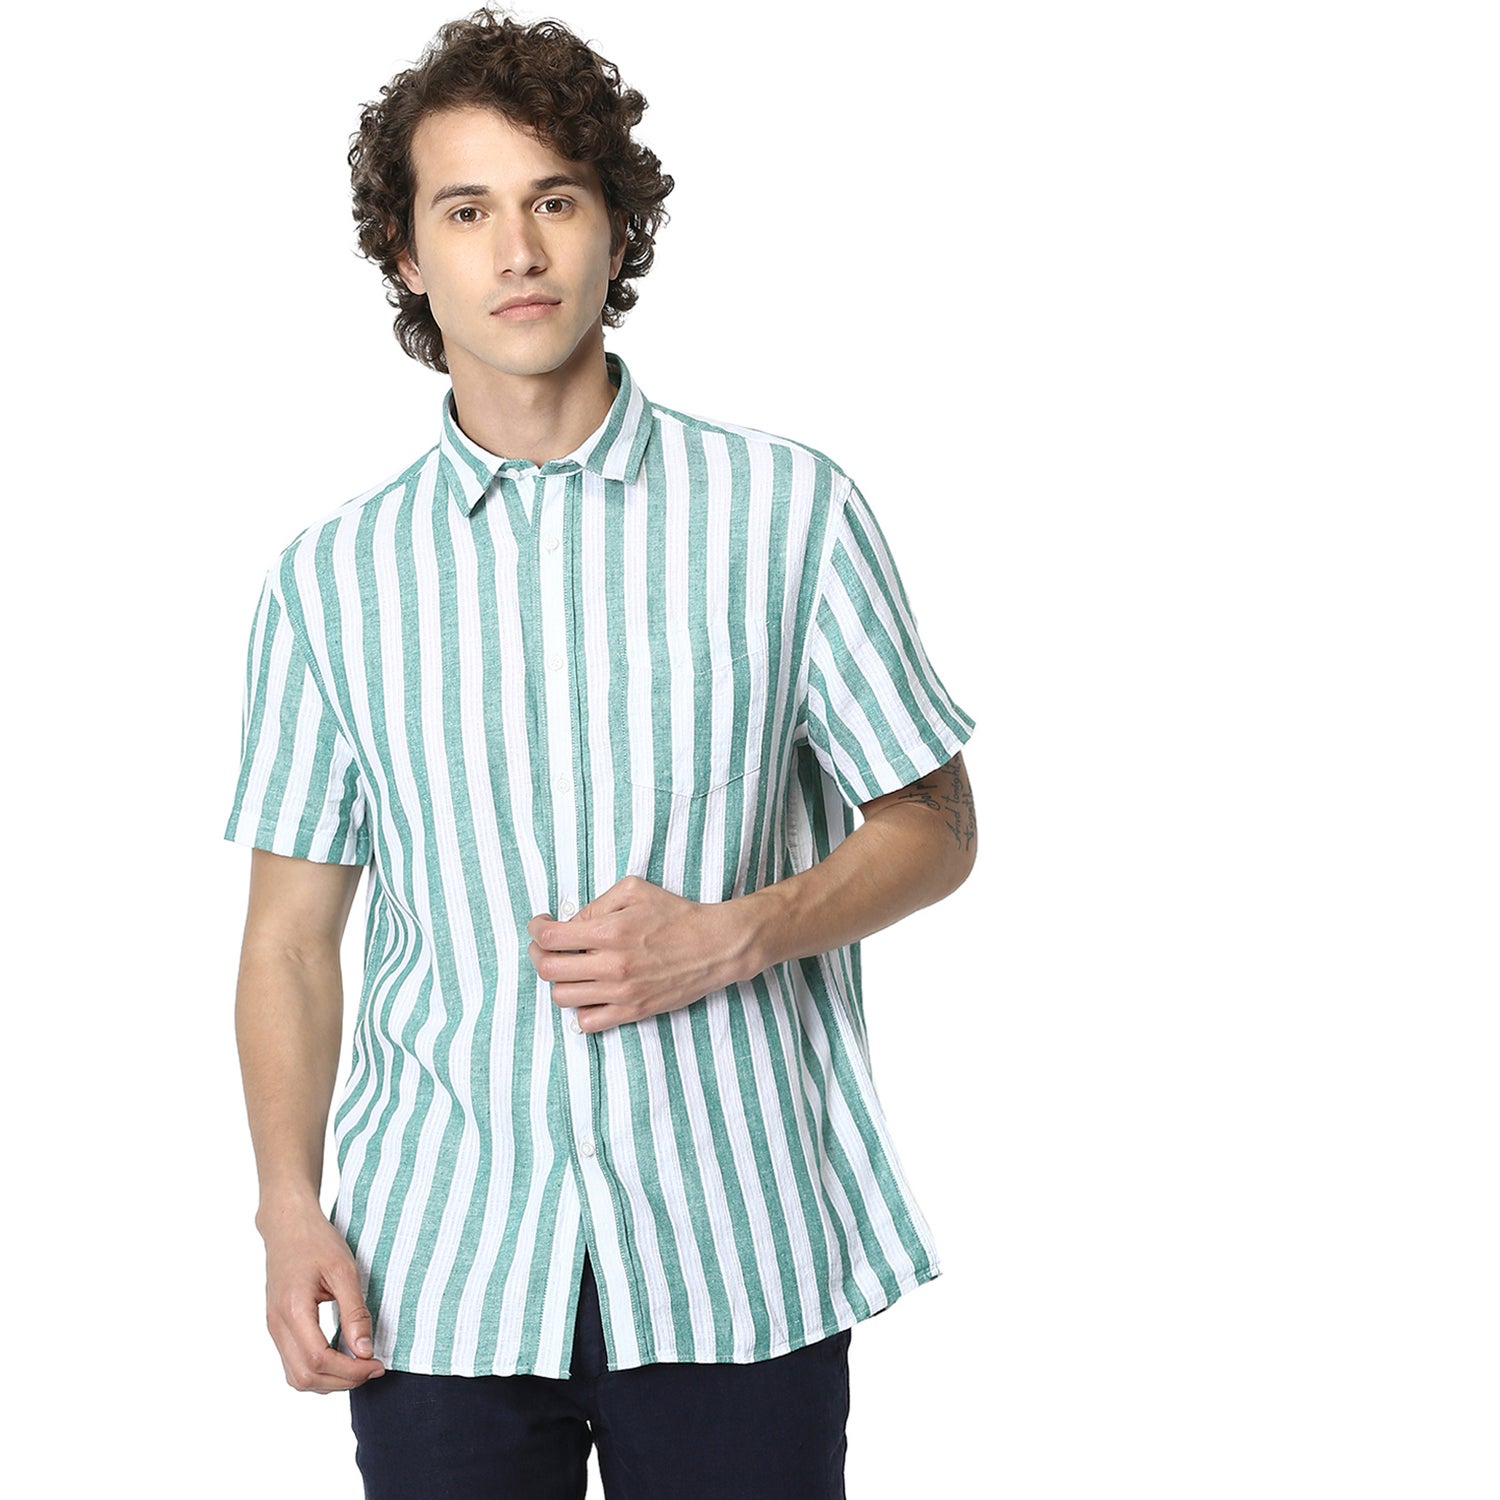 Green and White Regular Fit Striped Casual Shirt (RABATONLINSS)